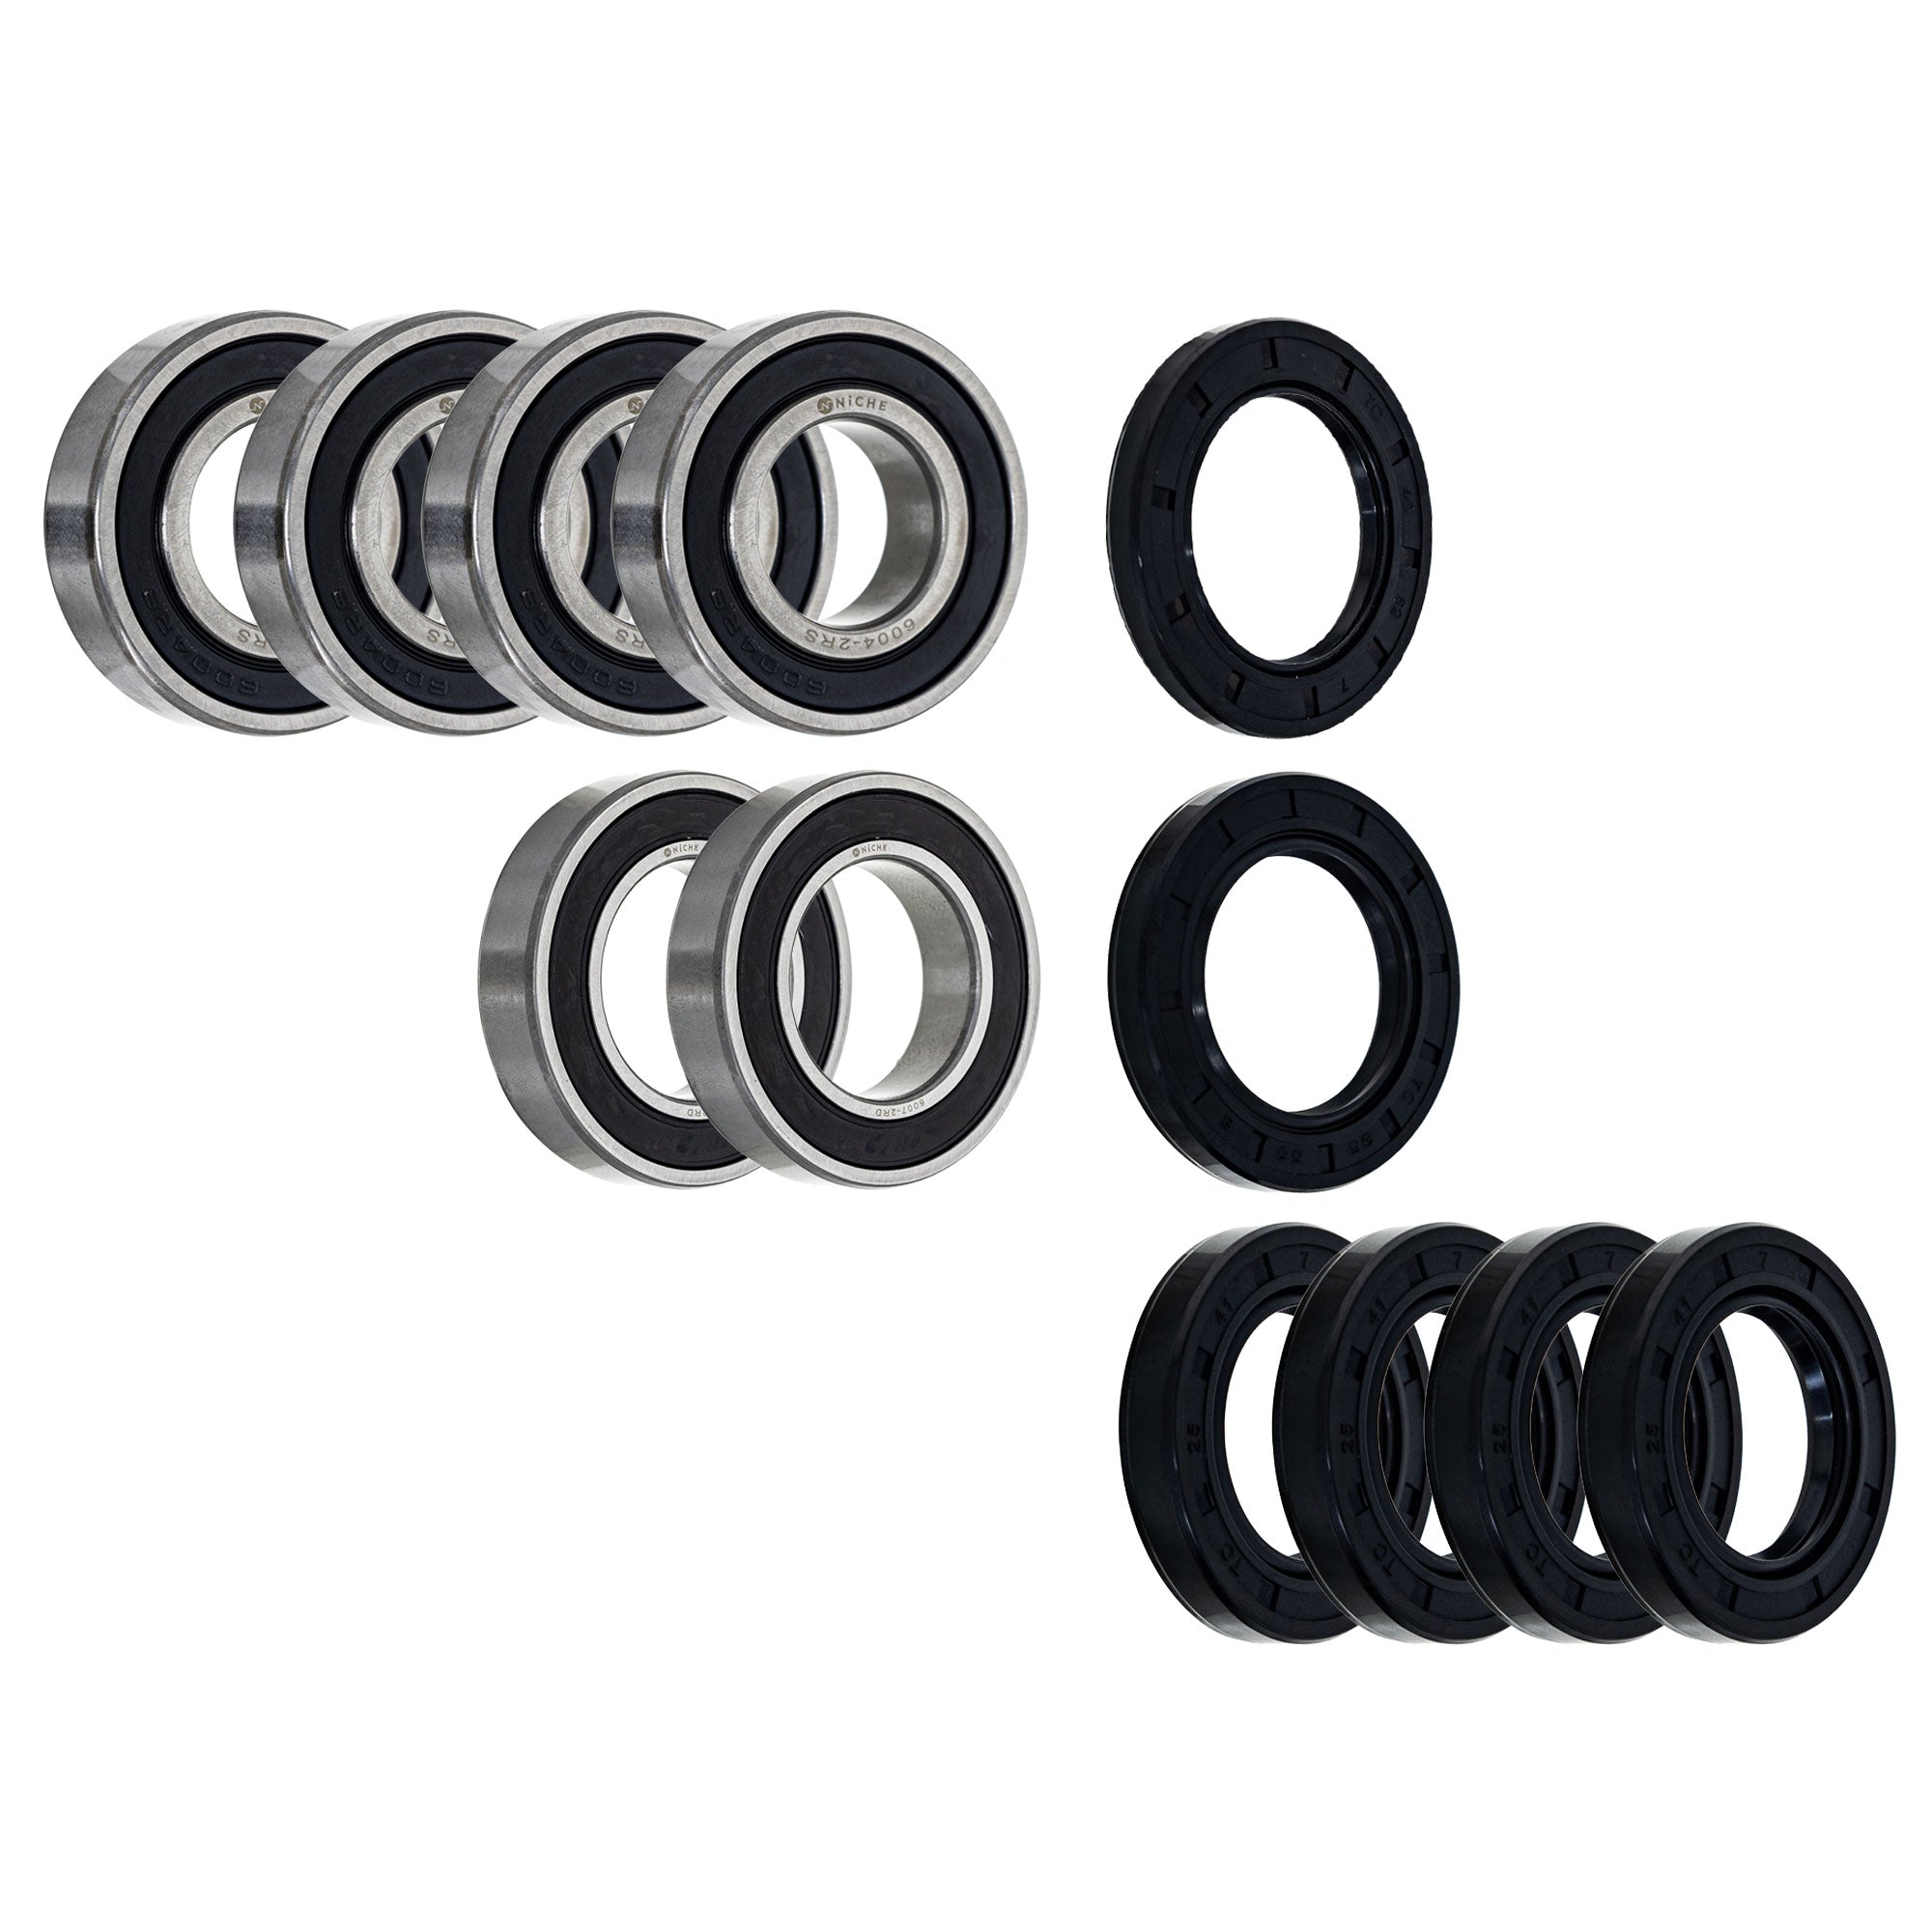 Wheel Bearing Seal Kit for zOTHER Ref No XR650R Shadow Rebel Pacific NICHE MK1008358